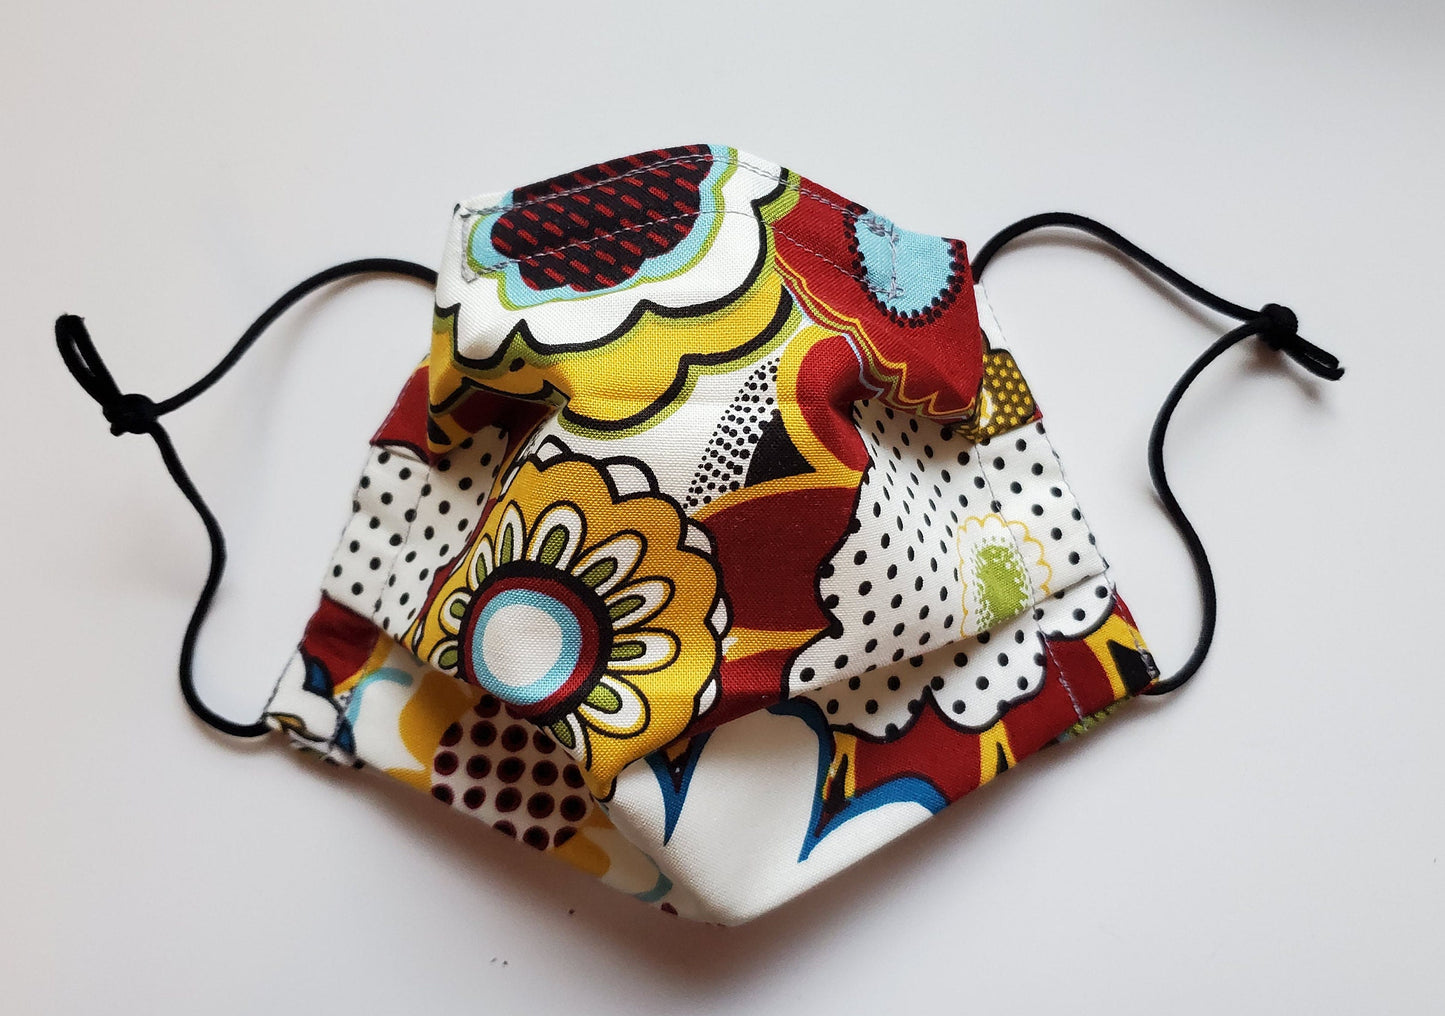 A cloth face mask in a bold 70s print with various outlined flowers and polka dots in reds, yellows, light blue, light green, and black and white. The mask is pleated with black elastic ear loops.